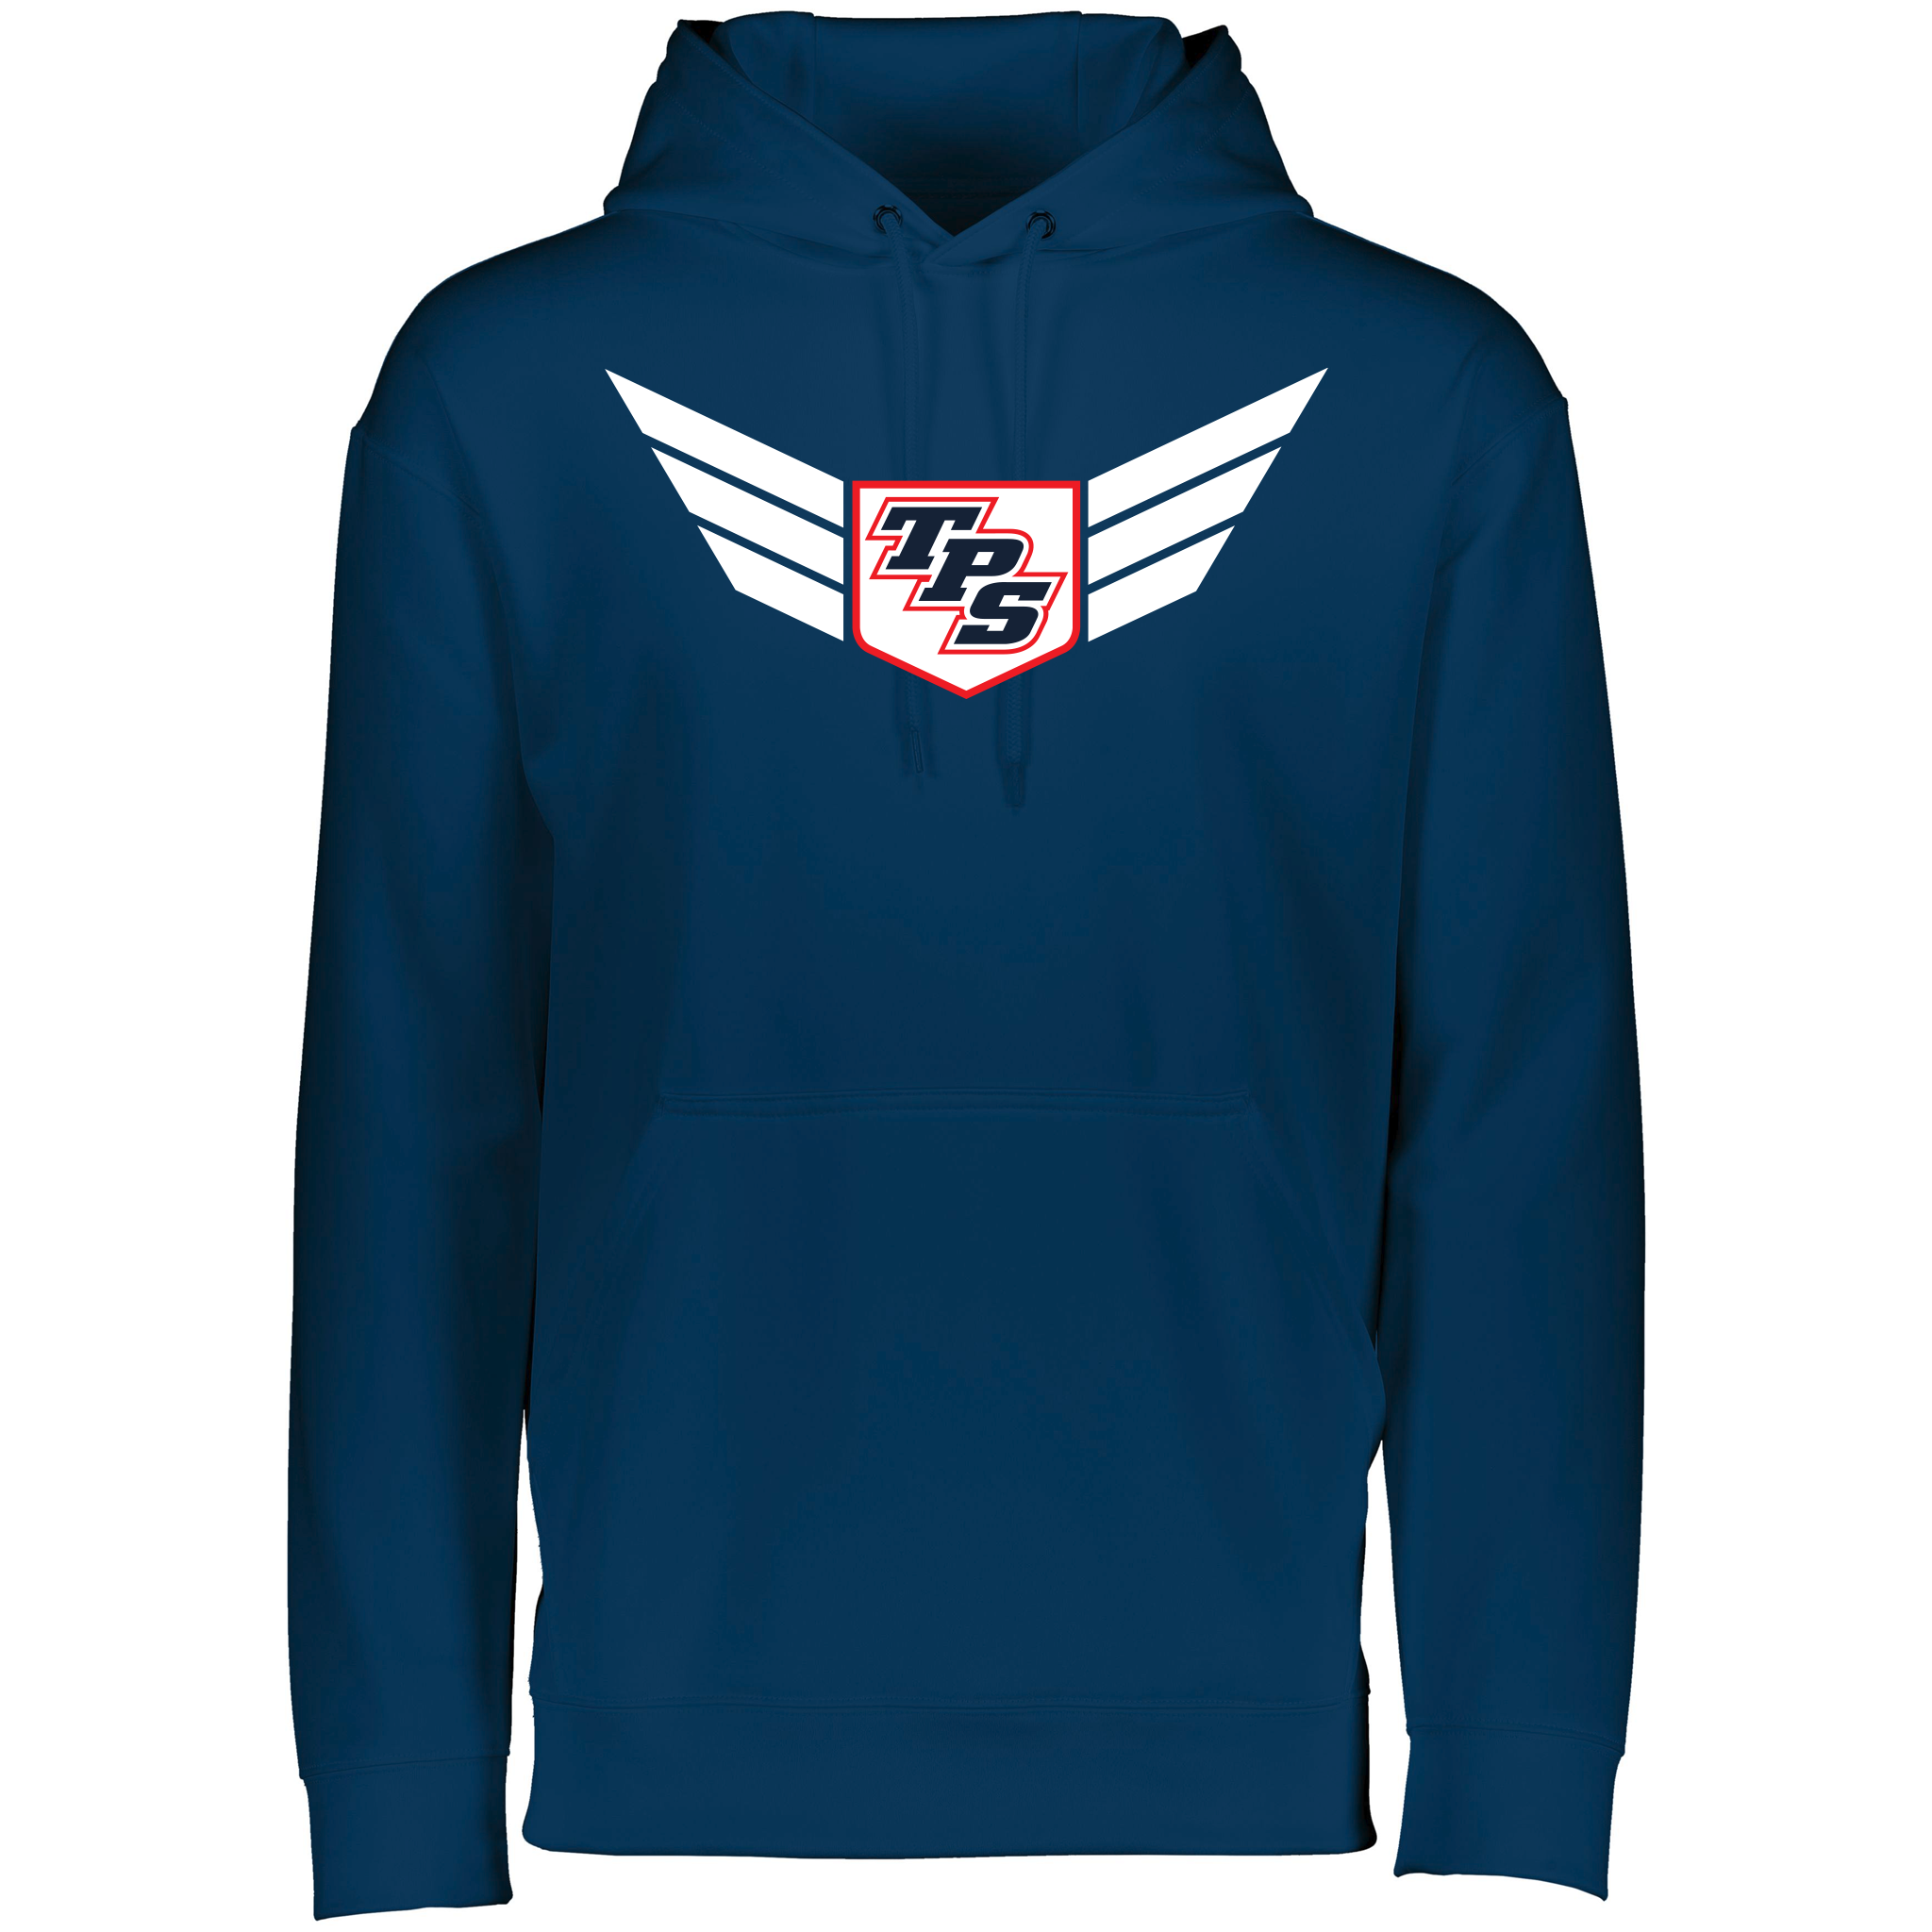 TPS Track/Cross Country Hoodie